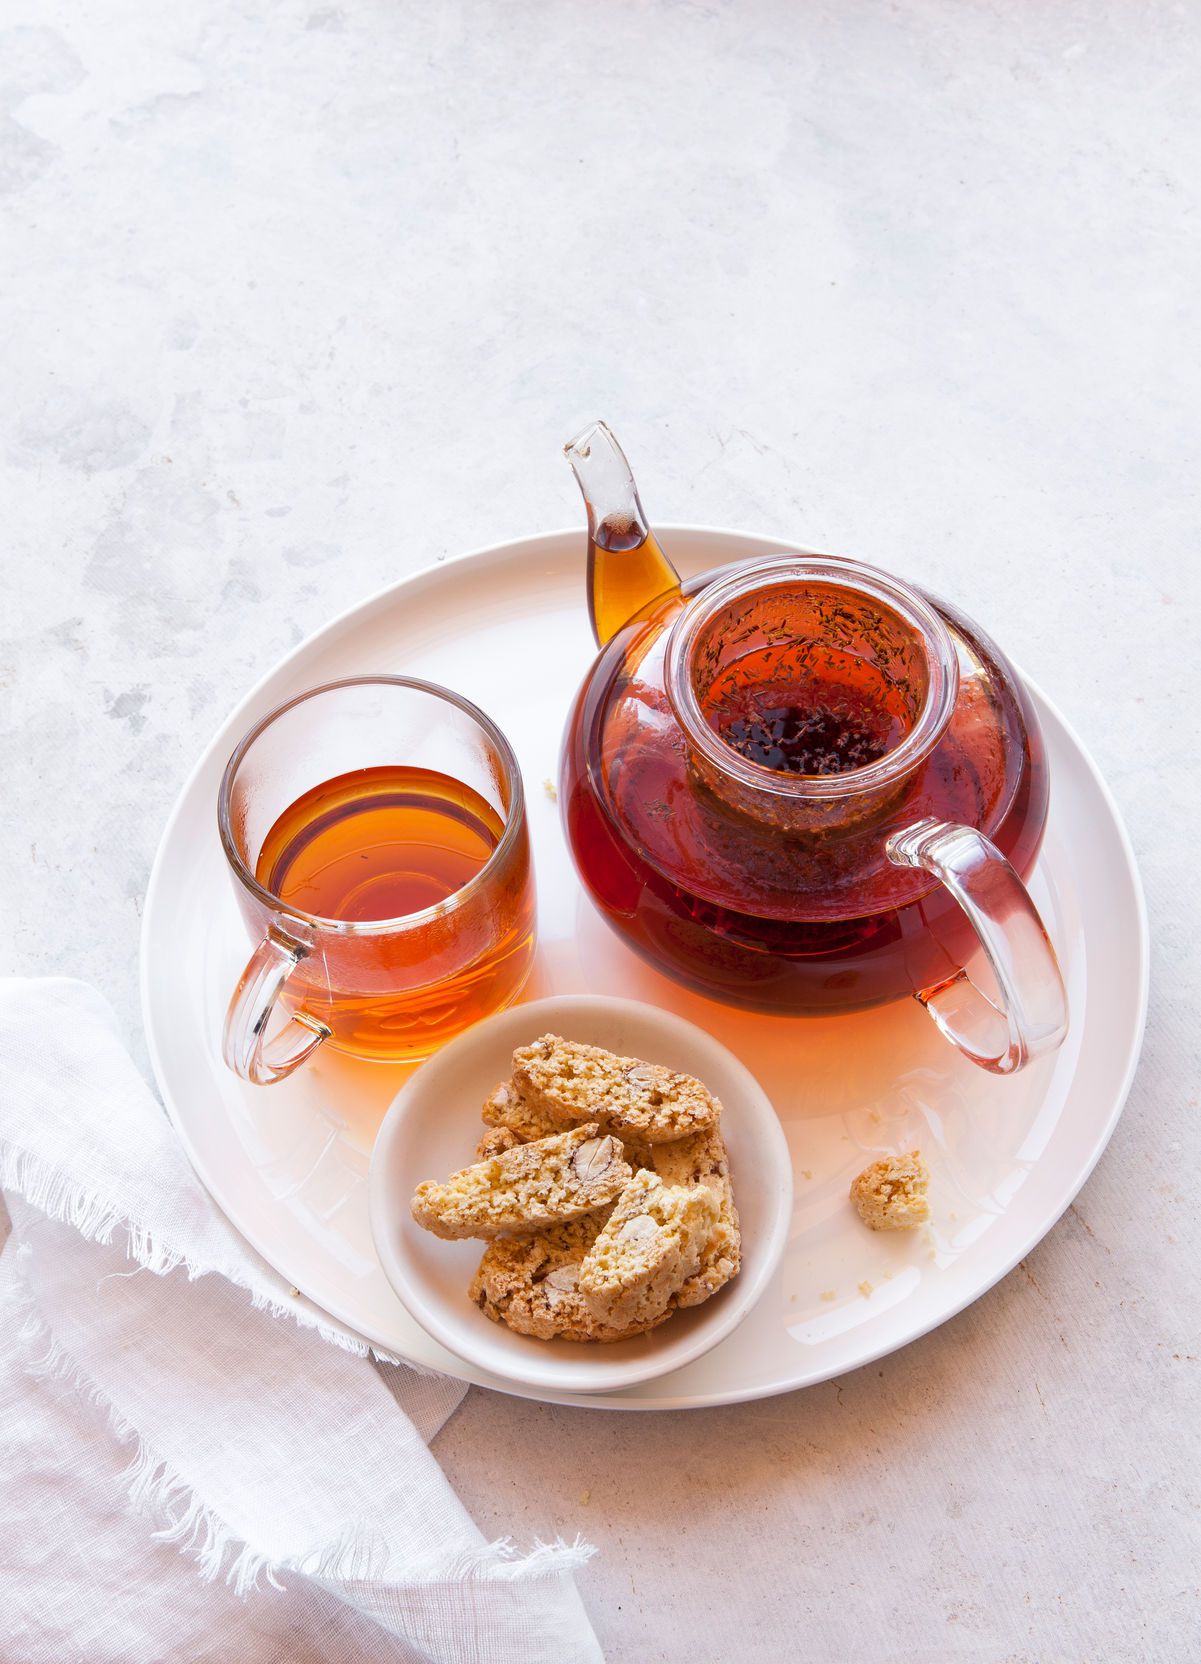 7 Teas for Bloating That Will Help Relieve Discomfort